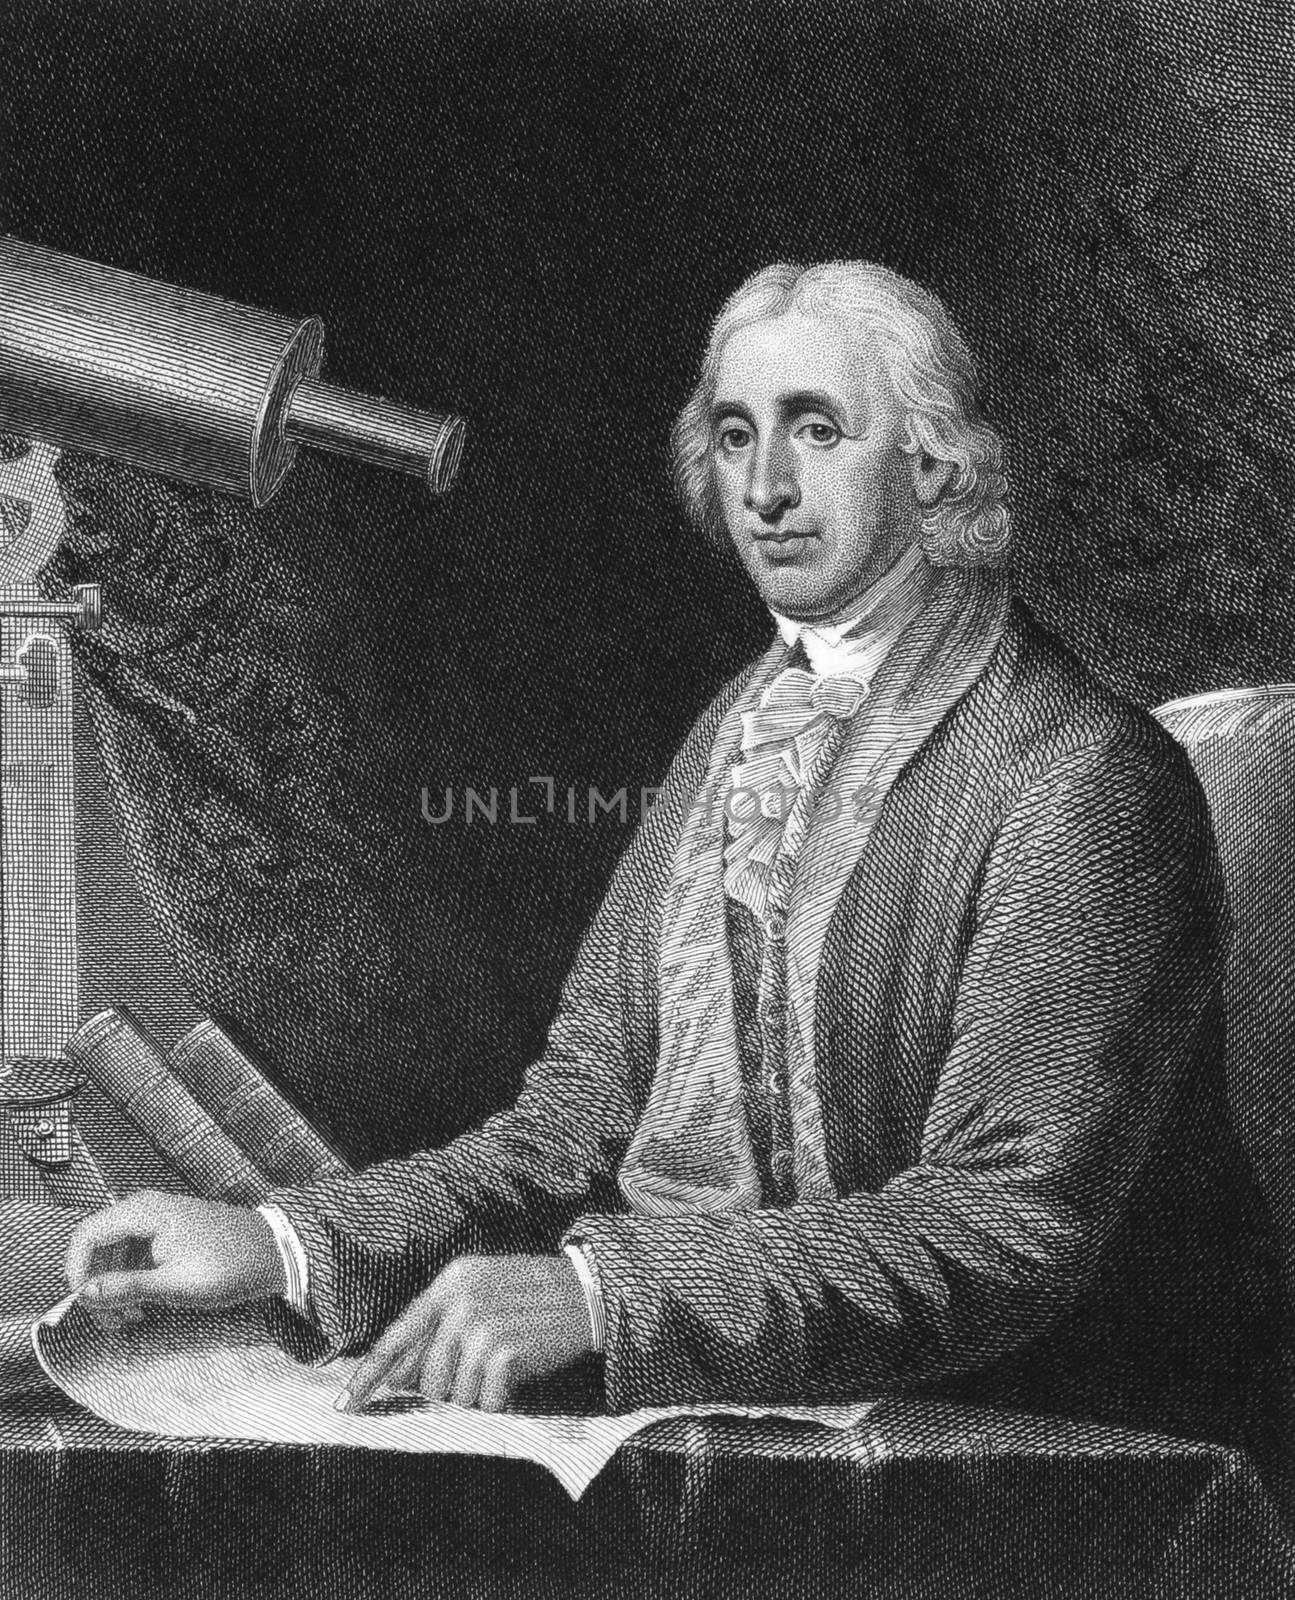 David Rittenhouse (1732-1796) on engraving from 1835. American astronomer, inventor, clockmaker, mathematician, surveyor, scientific instrument craftsman and public official. Engraved by J.B.Longacre and published in''National Portrait Gallery of Distinguished Americans Volume II'',USA,1835.